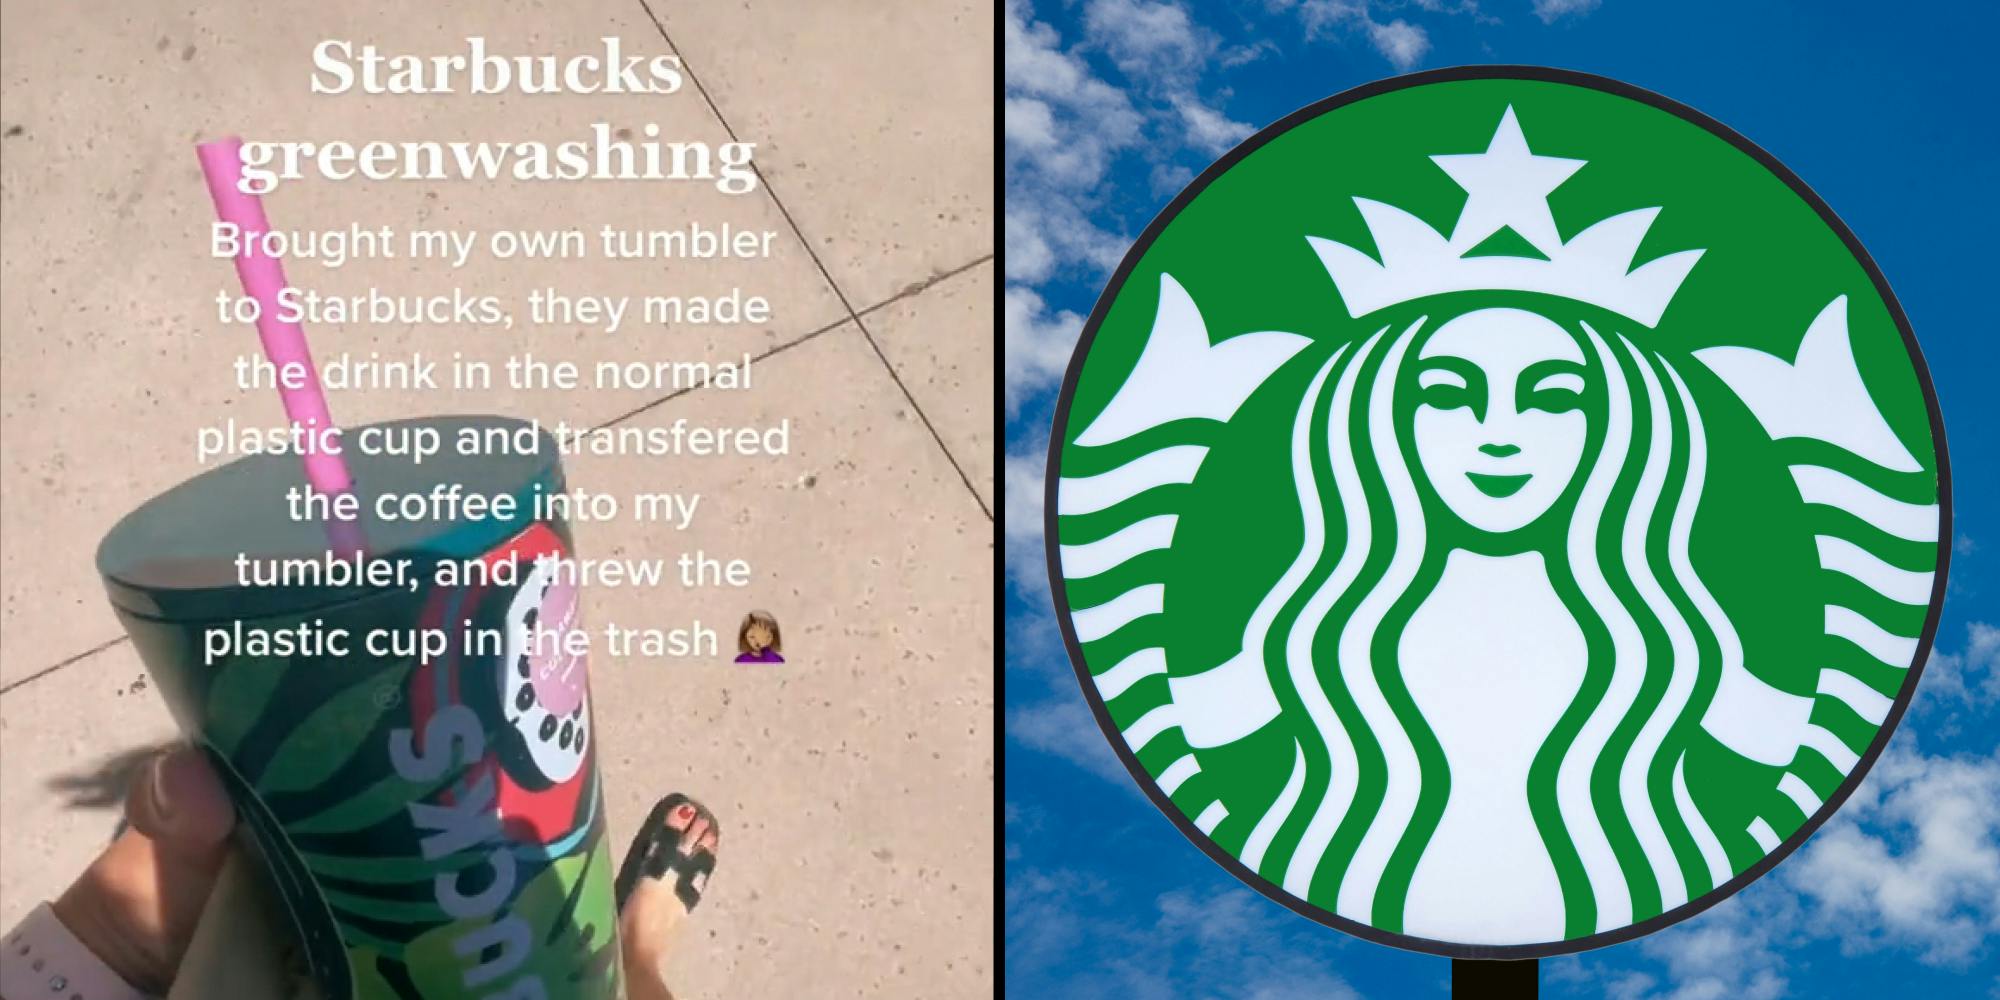 Woman walking holding Starbucks tumbler caption "Starbucks greenwashing: Brought my own tumbler to Starbucks, they made the drink in the normal plastic cup and transferred the coffee into my tumbler, and threw the plastic cup in the trash" (l) Starbucks sign on blue sky background (r)